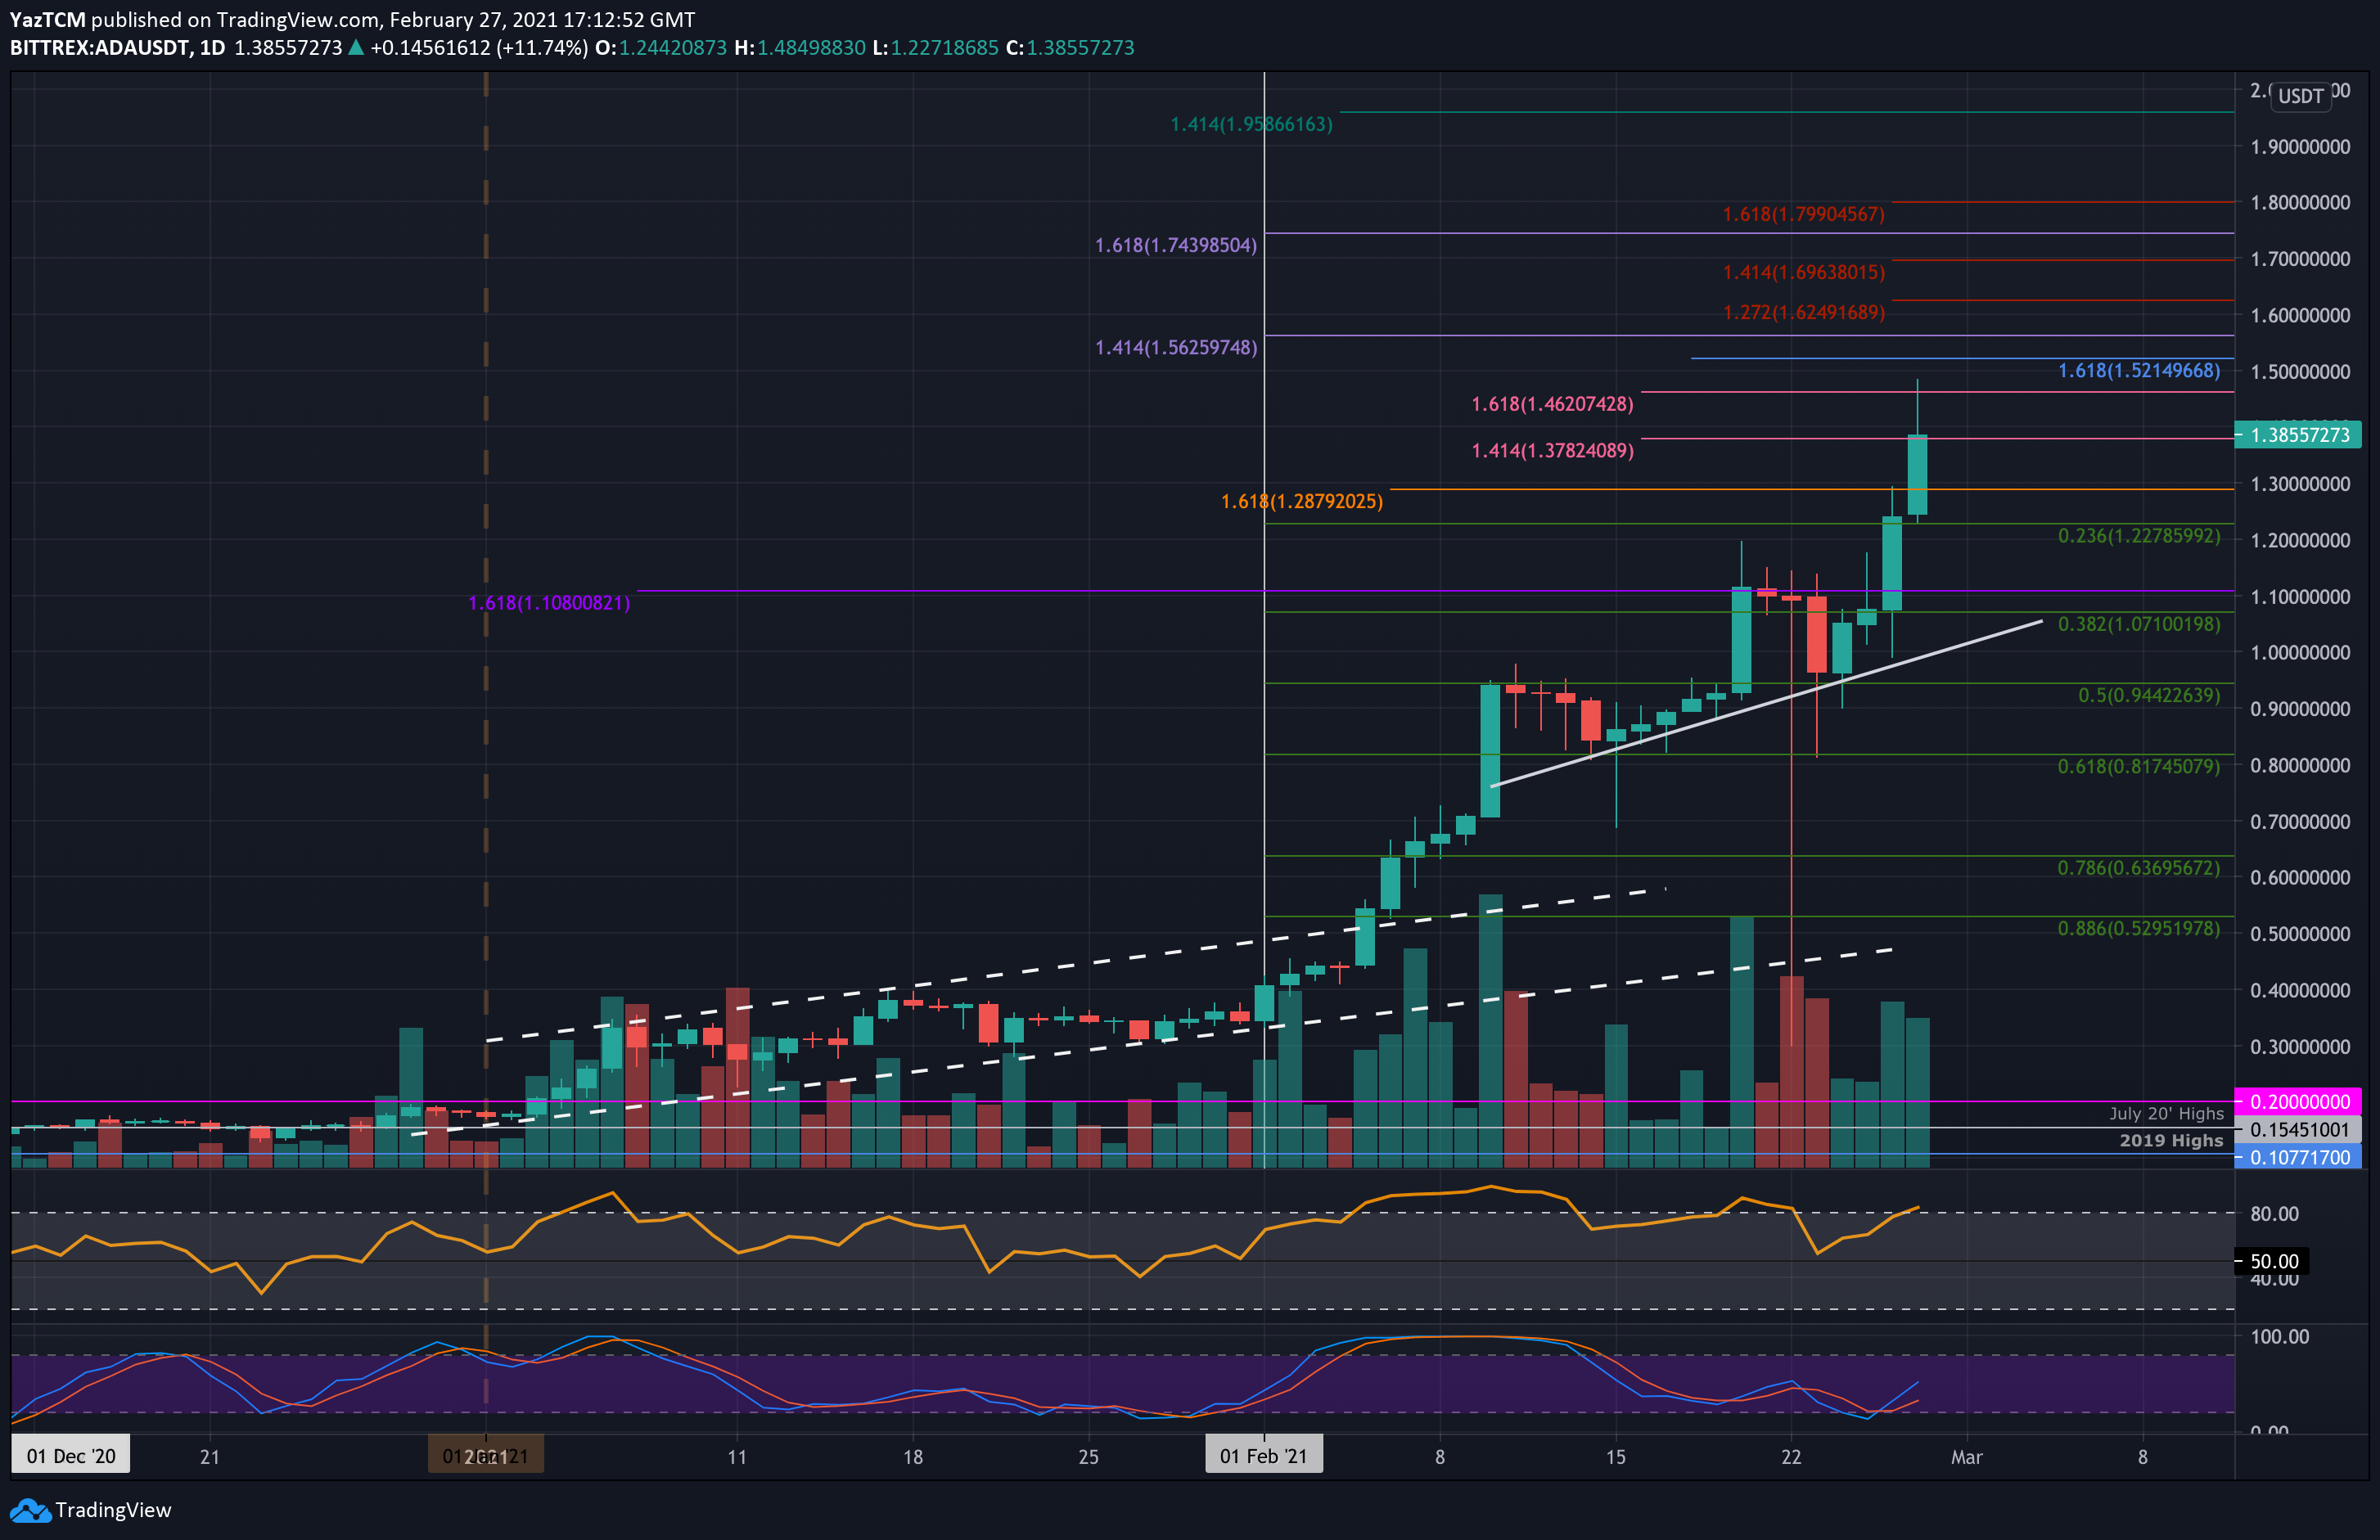 Cardano Price Chart Today - Live ADA/USD - Gold Price